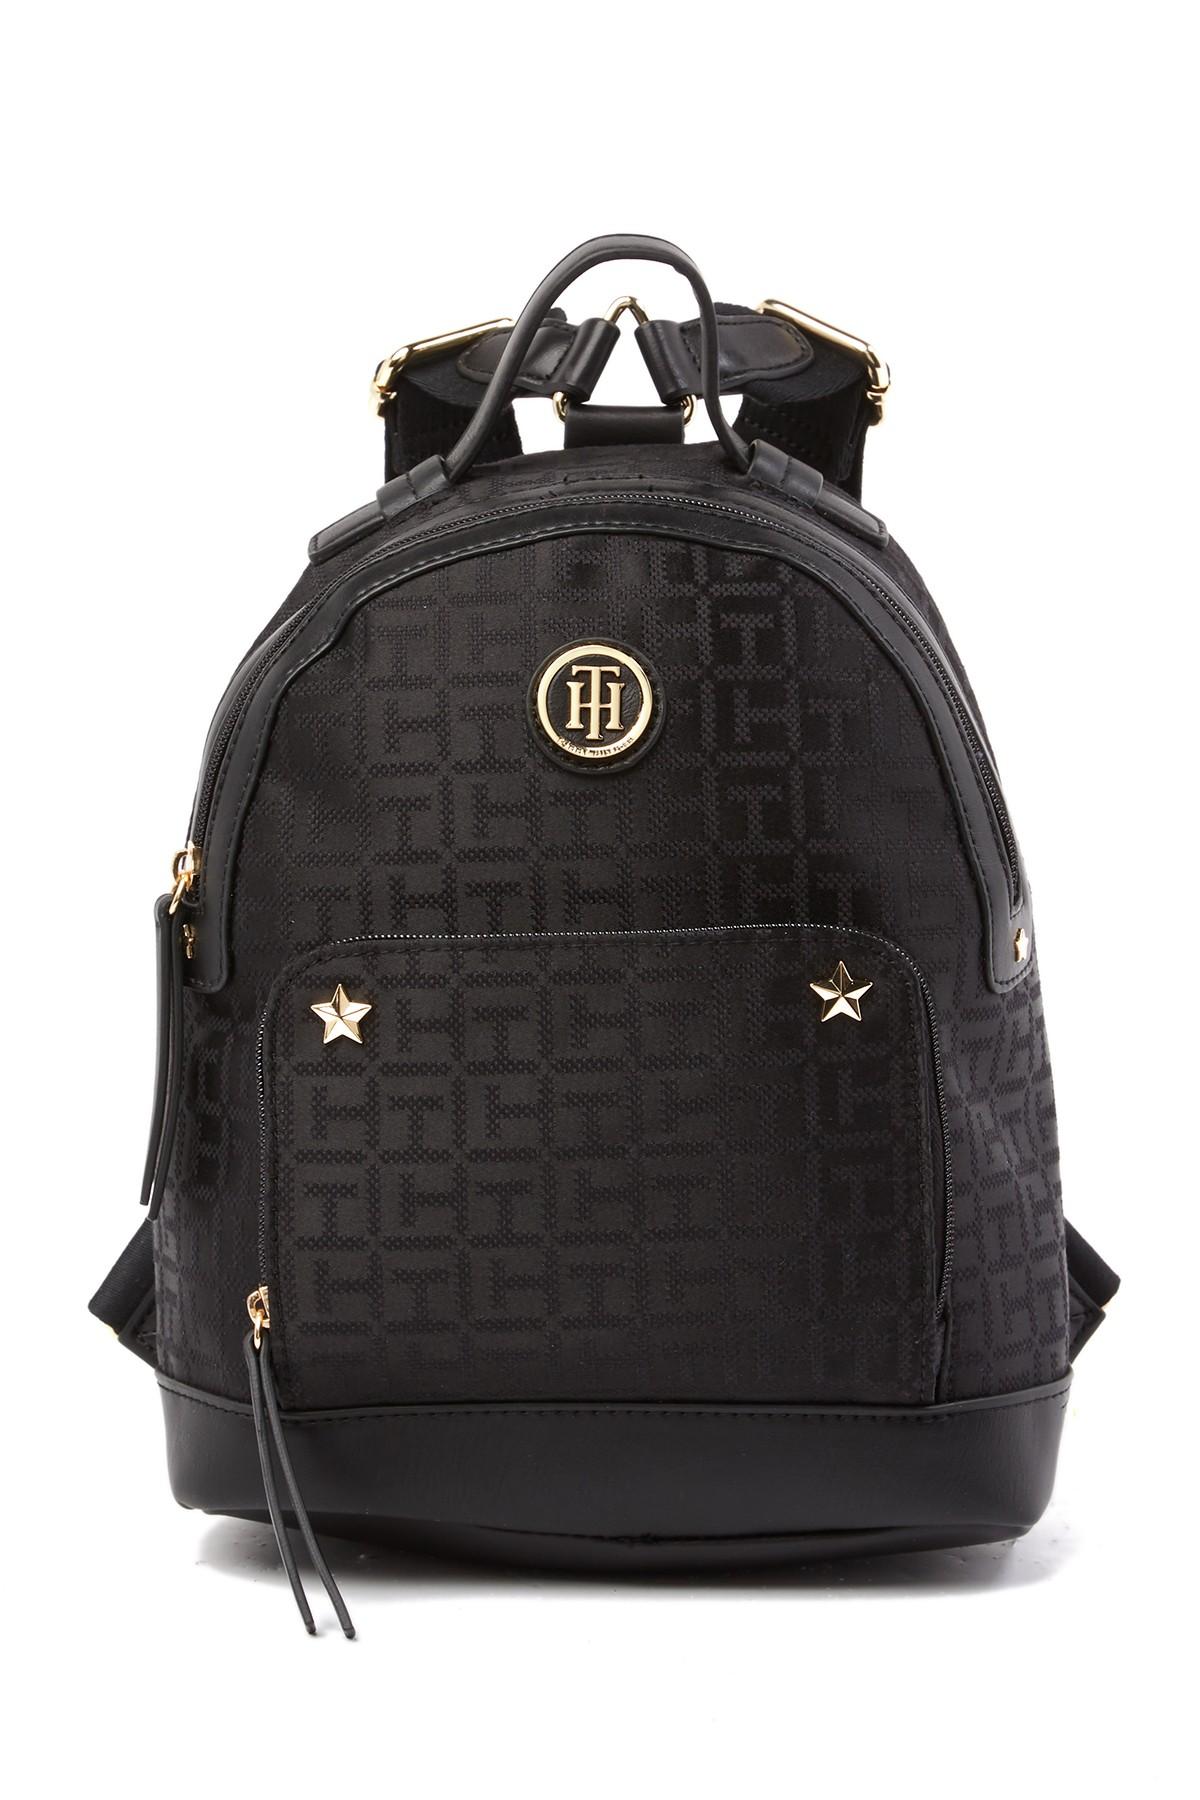 Tommy Hilfiger Synthetic Jacquard Backpack in Black - Lyst